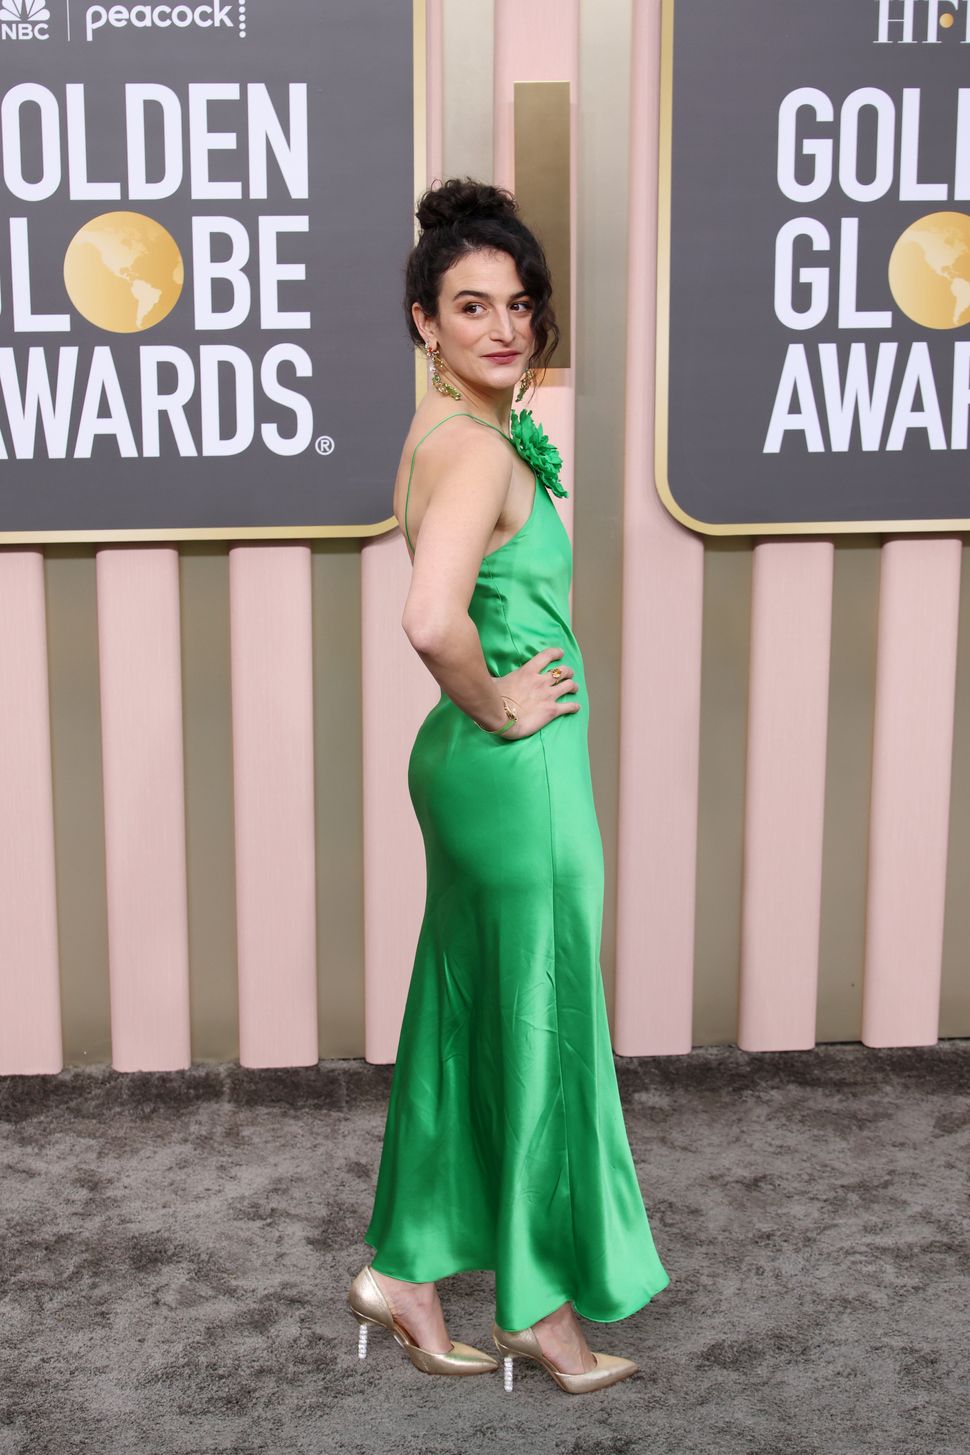 Actor and comedian Jenny Slate.